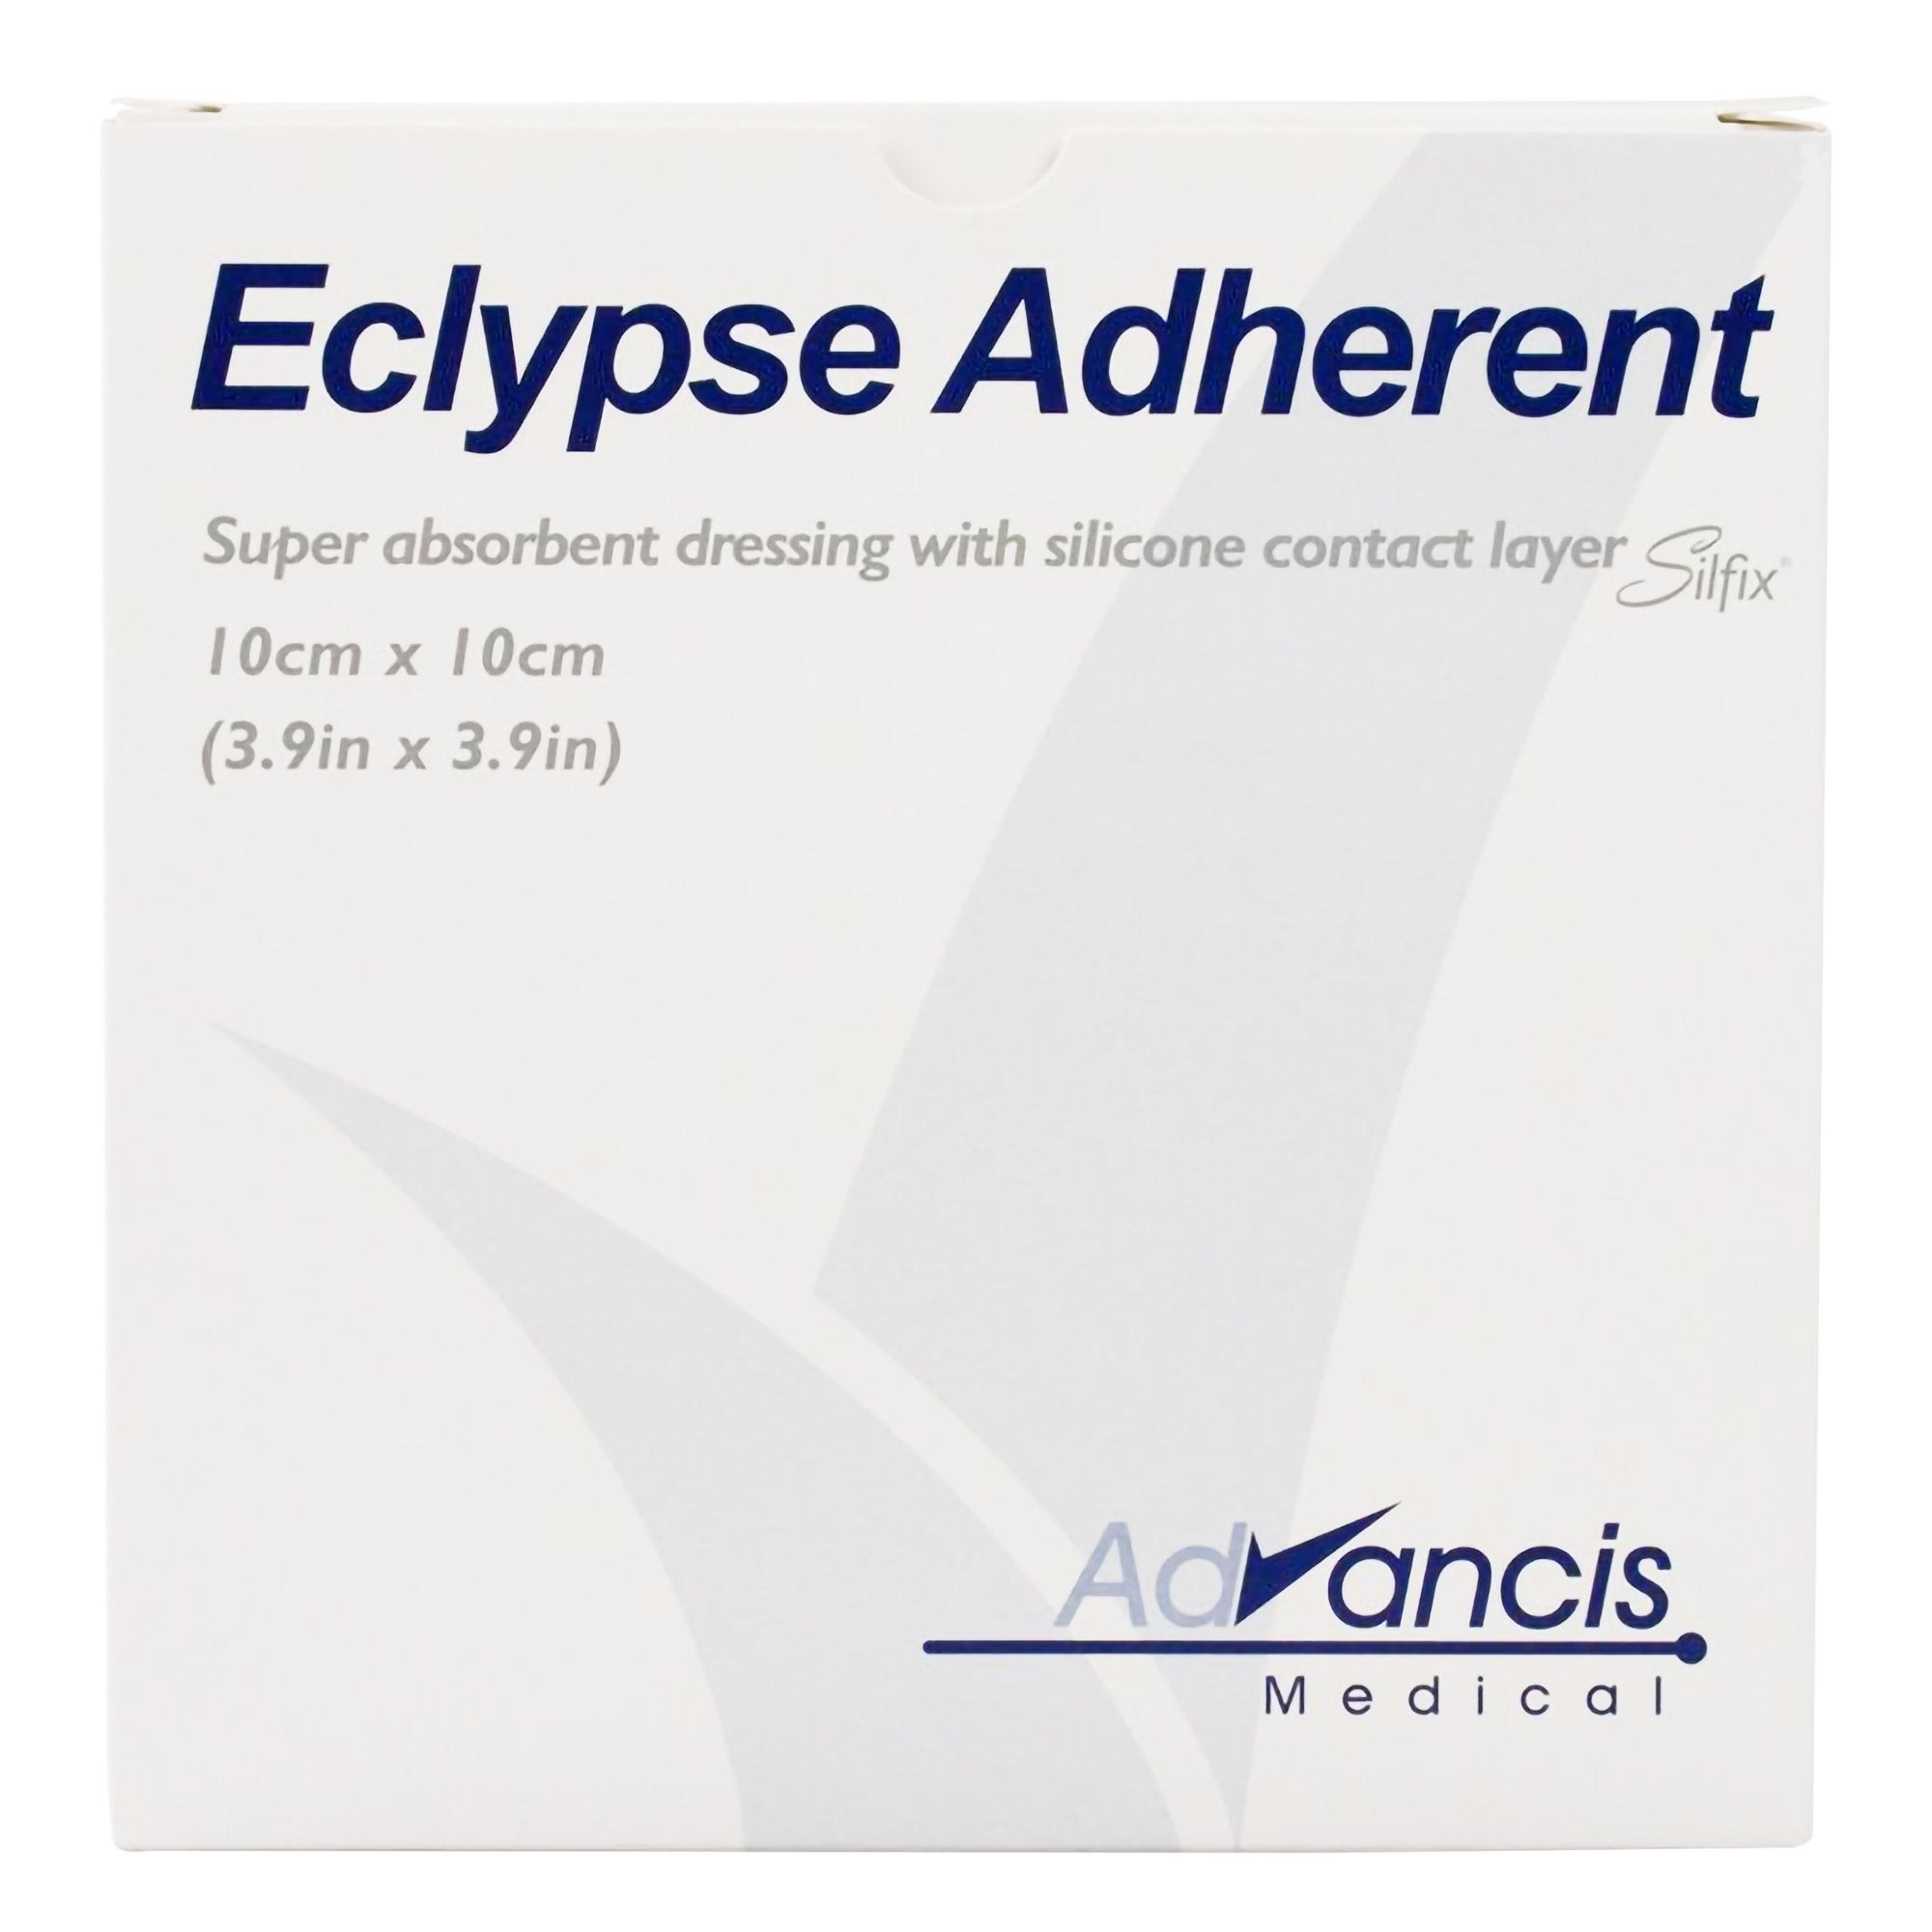 Super Absorbent Dressing Eclypse® Adherent 4 X 4 Inch Square